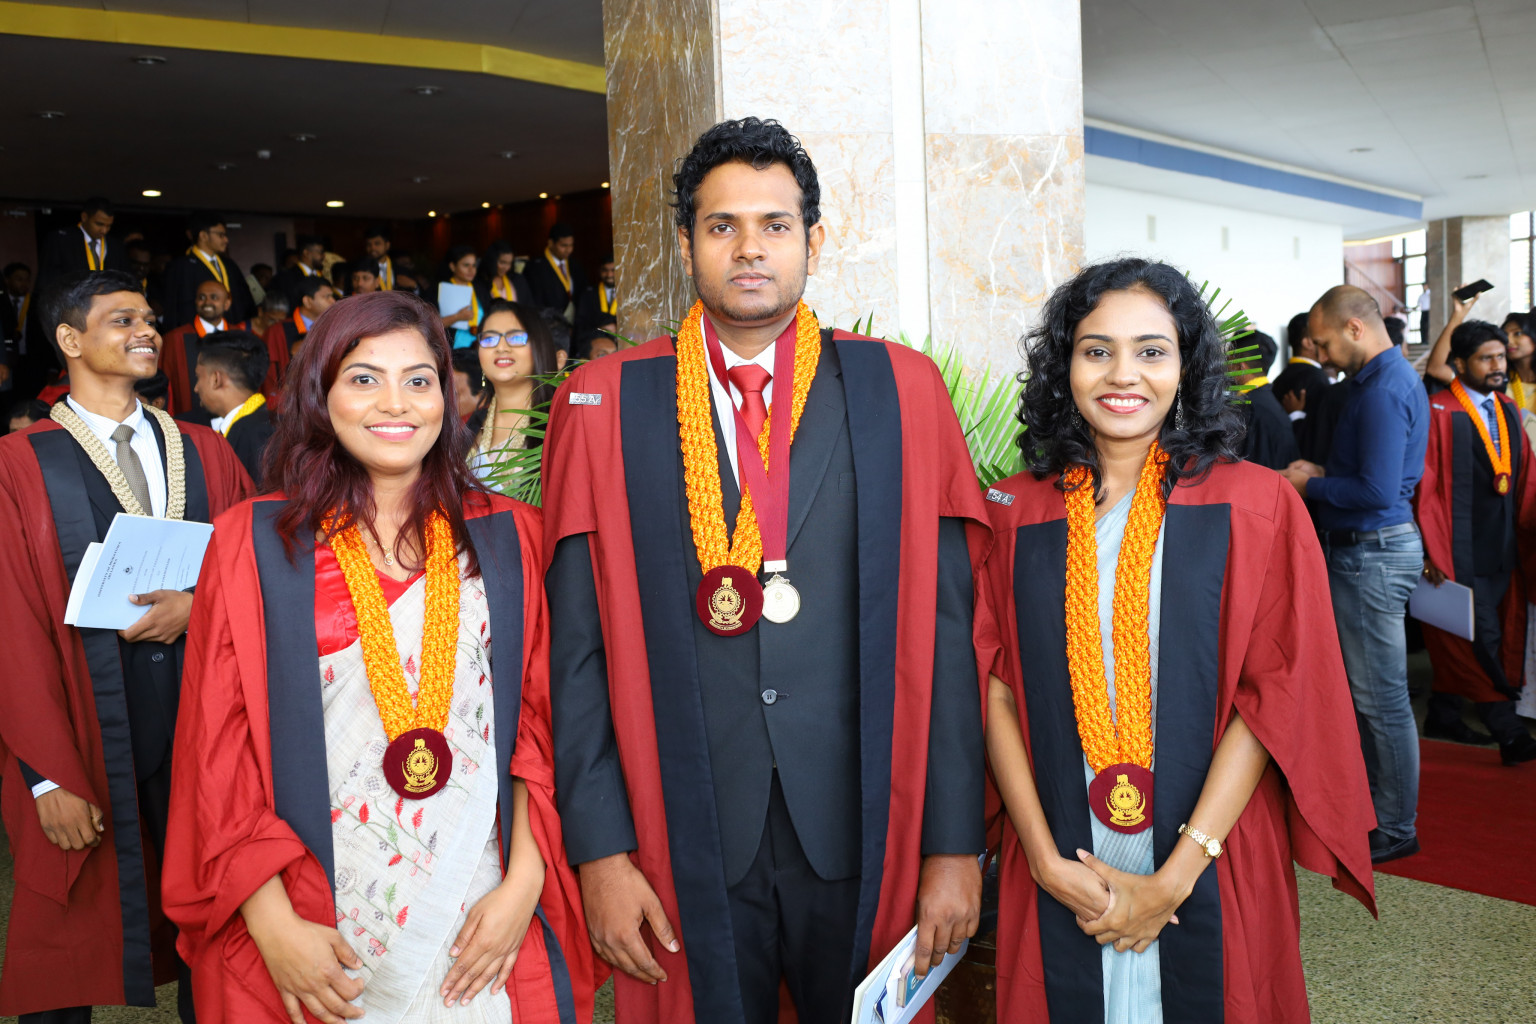 44TH GENERAL CONVOCATION OF THE UNIVERSITY OF MORATUWA